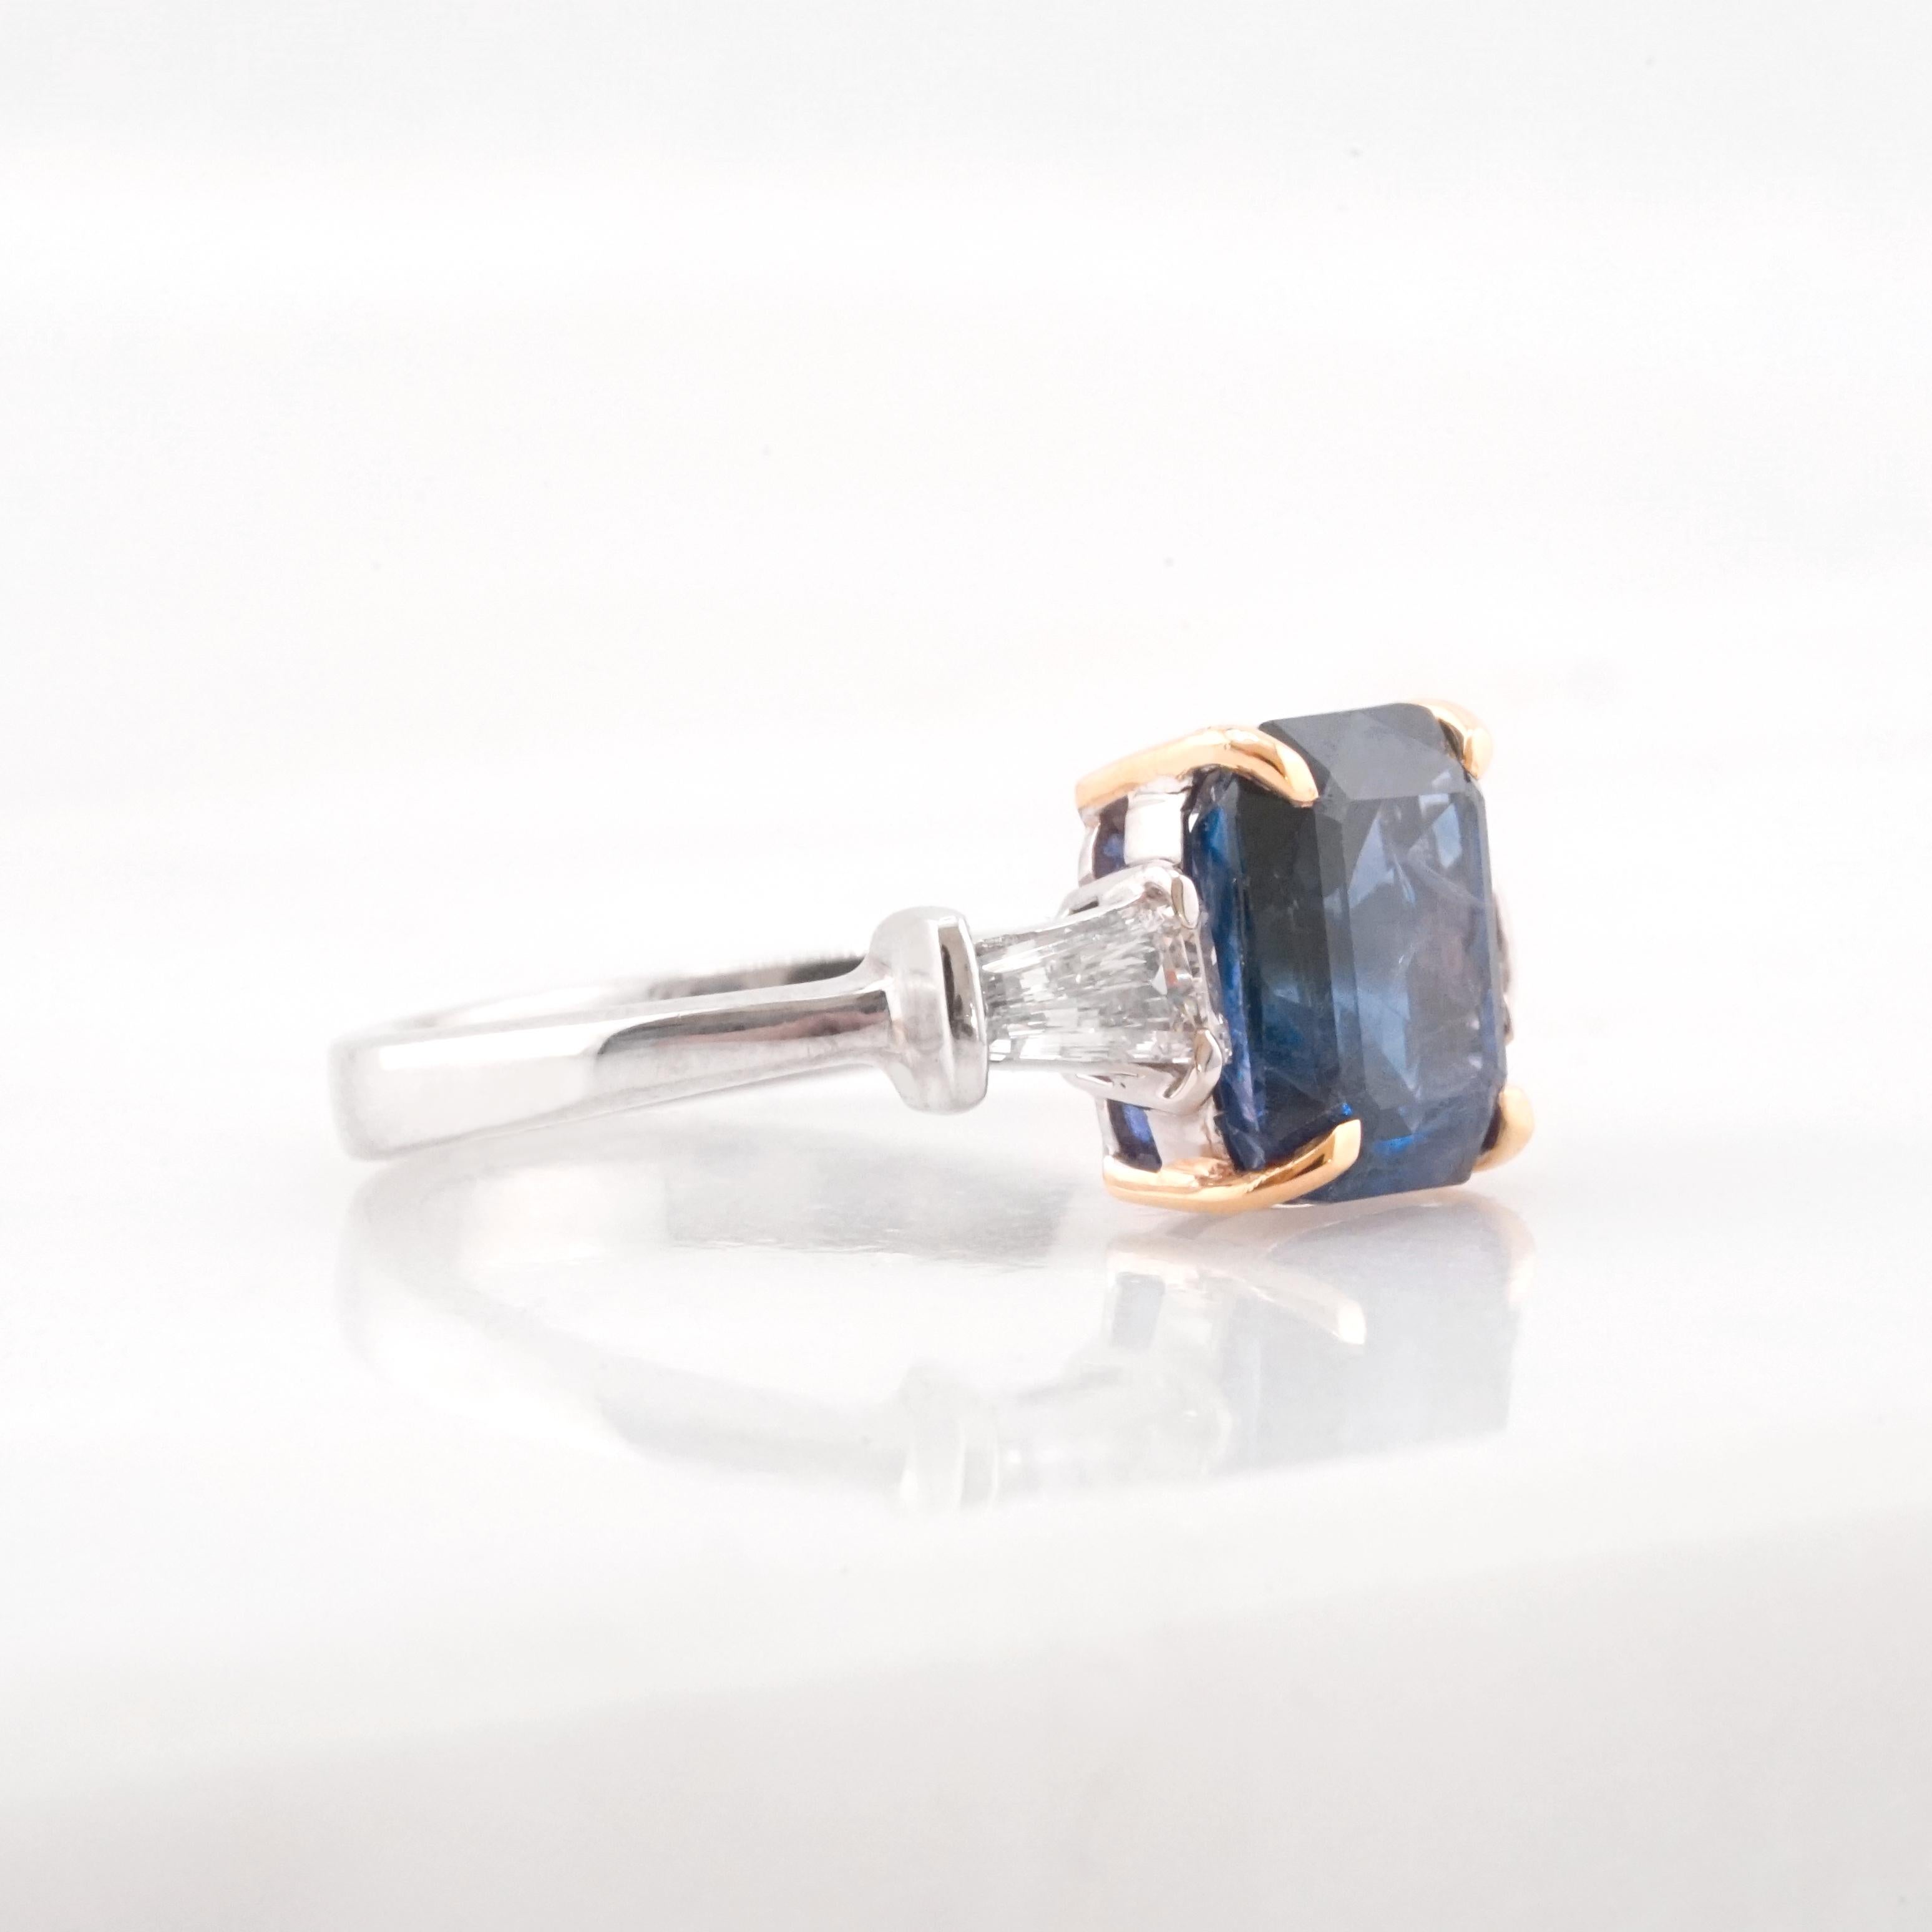 This exquisite piece is a testament to the timeless artistry of Antinori di Sanpietro. Crafted in Italy, the ring boasts a majestic sapphire, weighing 4.23 carats, at its center. 

The sapphire, a gem of arresting blue, is certified by the GRS,